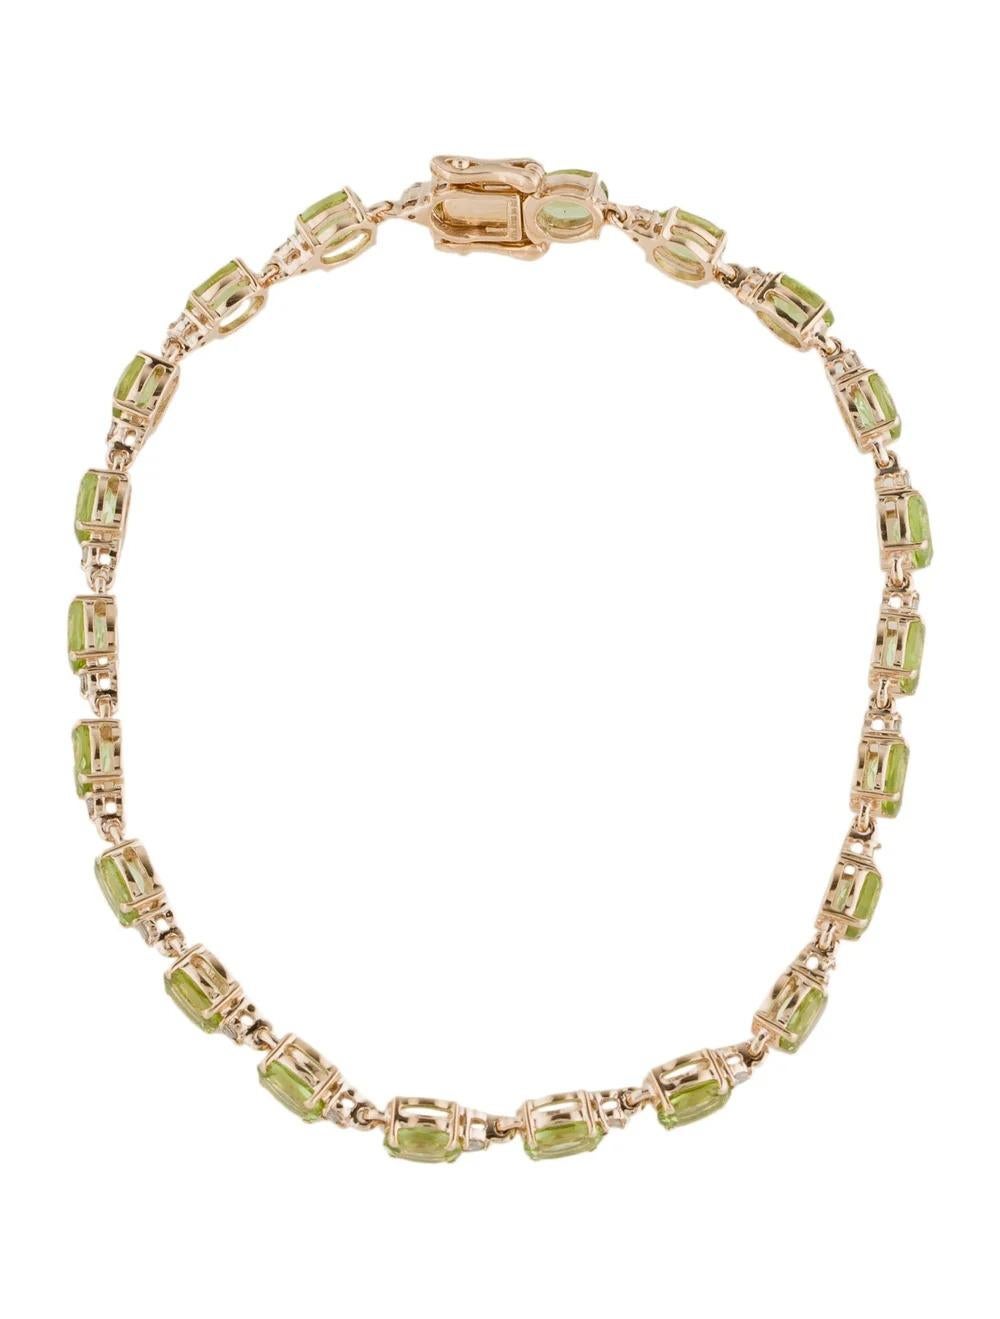 Vintage 14K Peridot Diamond Link Bracelet Green Gemstone, Statement Jewelry In New Condition For Sale In Holtsville, NY